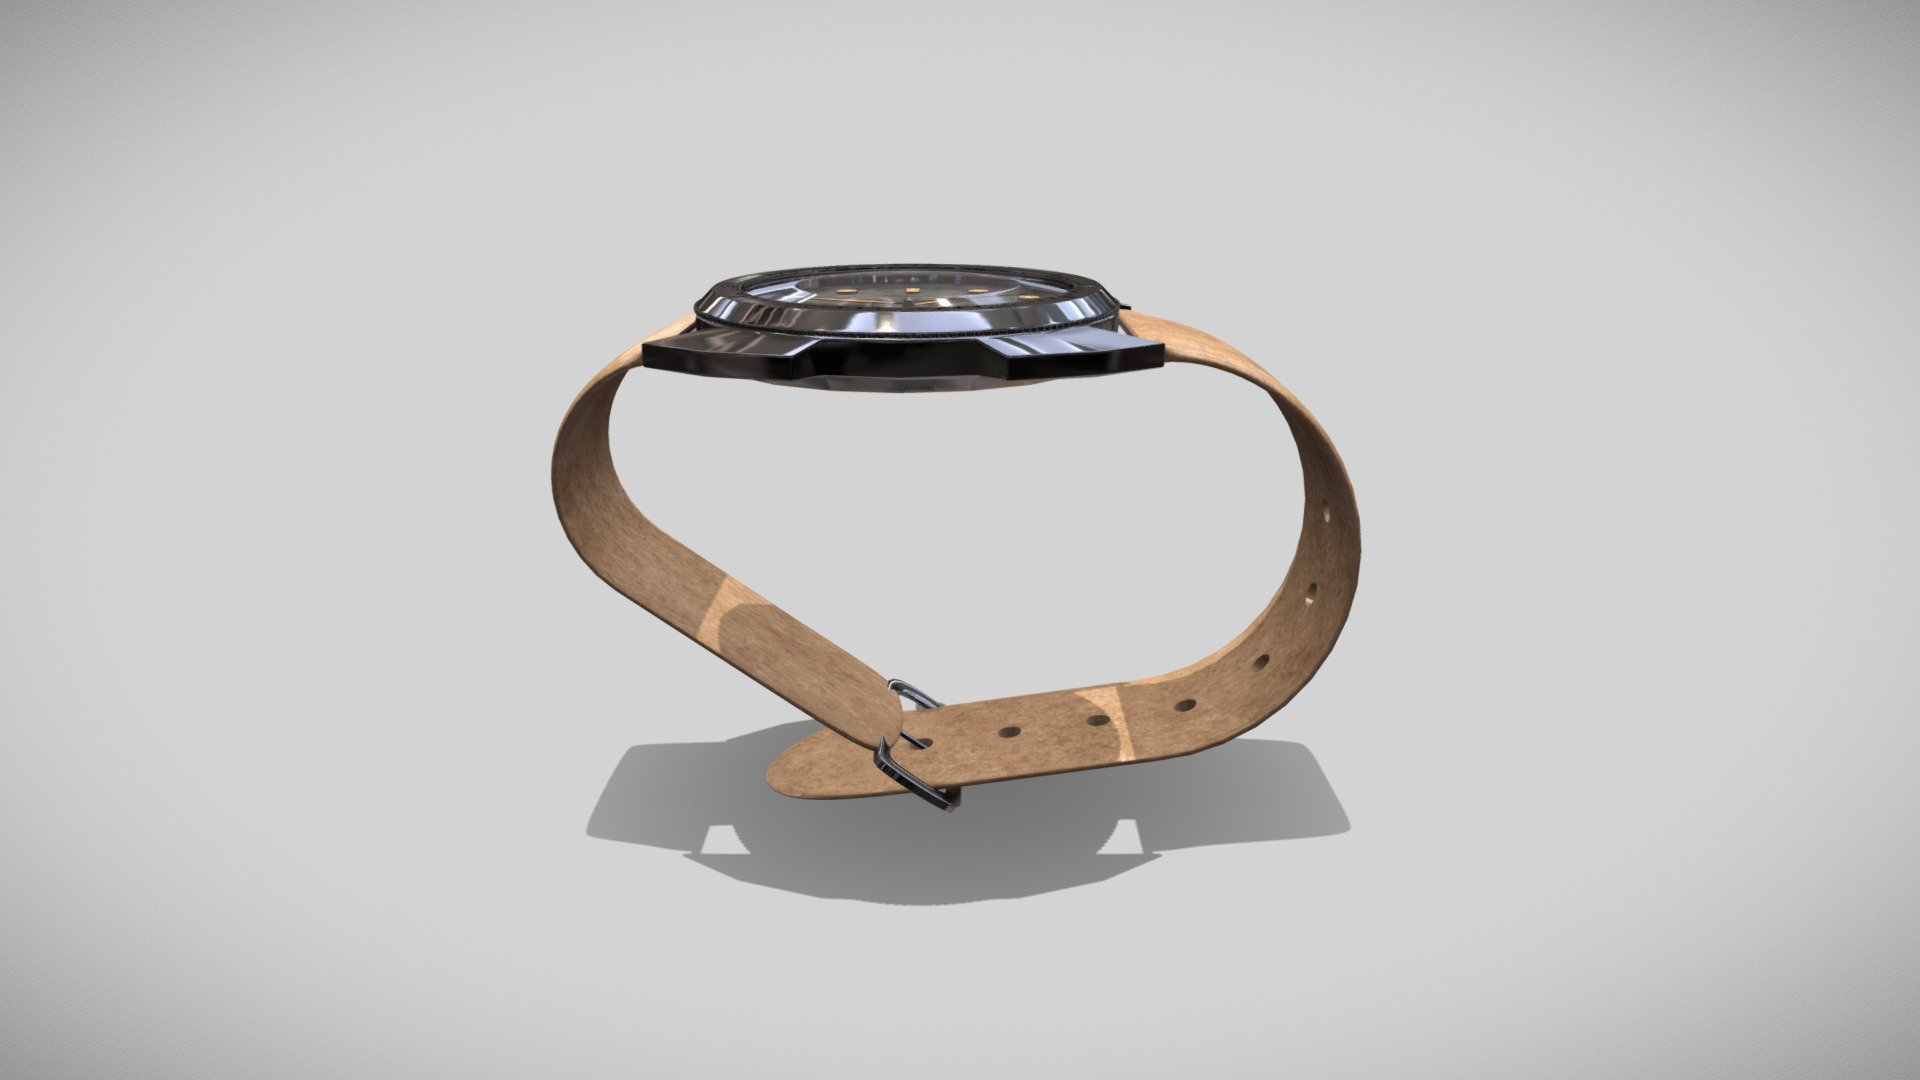 I managed to animate my watch - High Poly Watch (animated) - 3D model by HarlWise 3d model